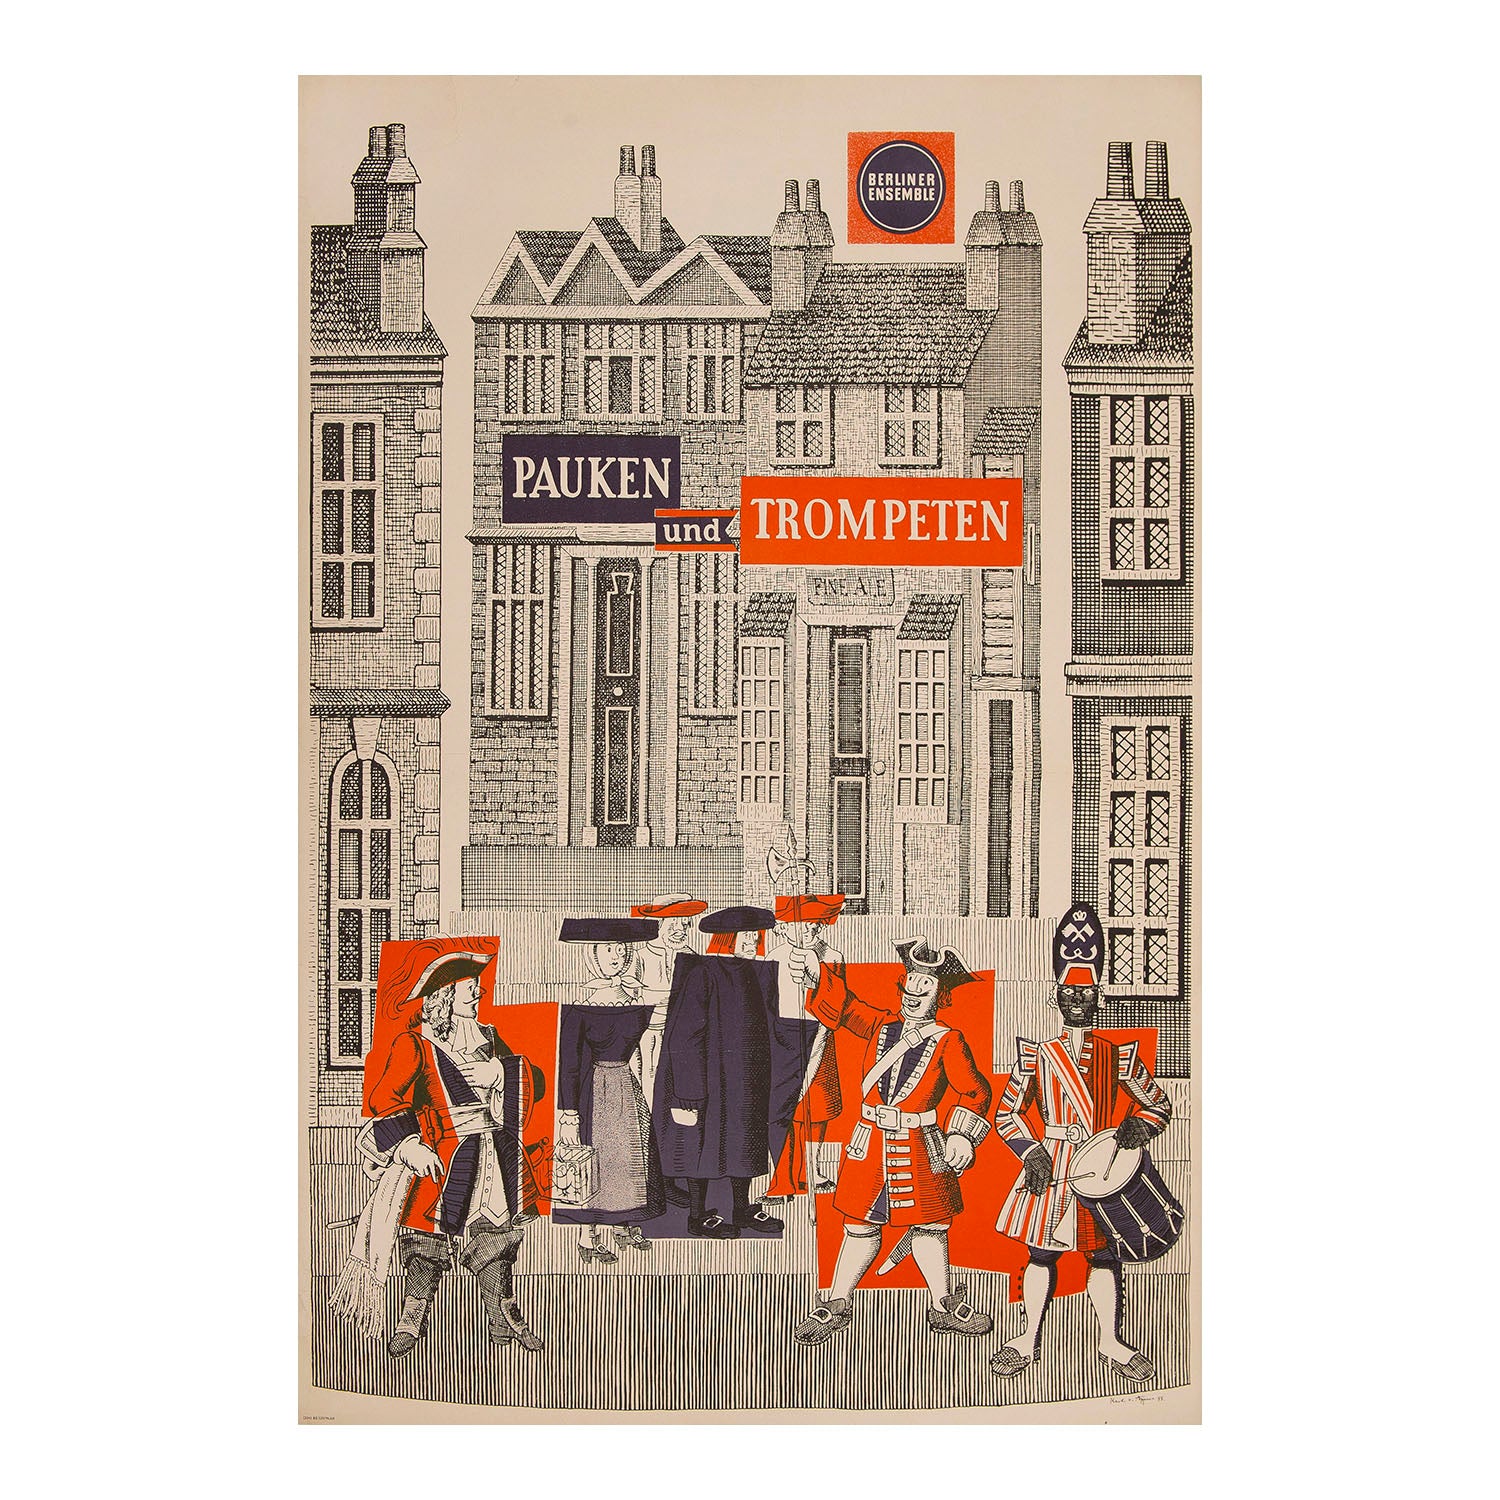 An original, vintage, theatre poster for the Berliner Ensemble’s production of Pauken und Trompeten (Trumpets and Drums) by Bertolt Brecht, 1955. Illustrated by Karl von Appen, the artwork highlights five characters amongst a backdrop of houses. 